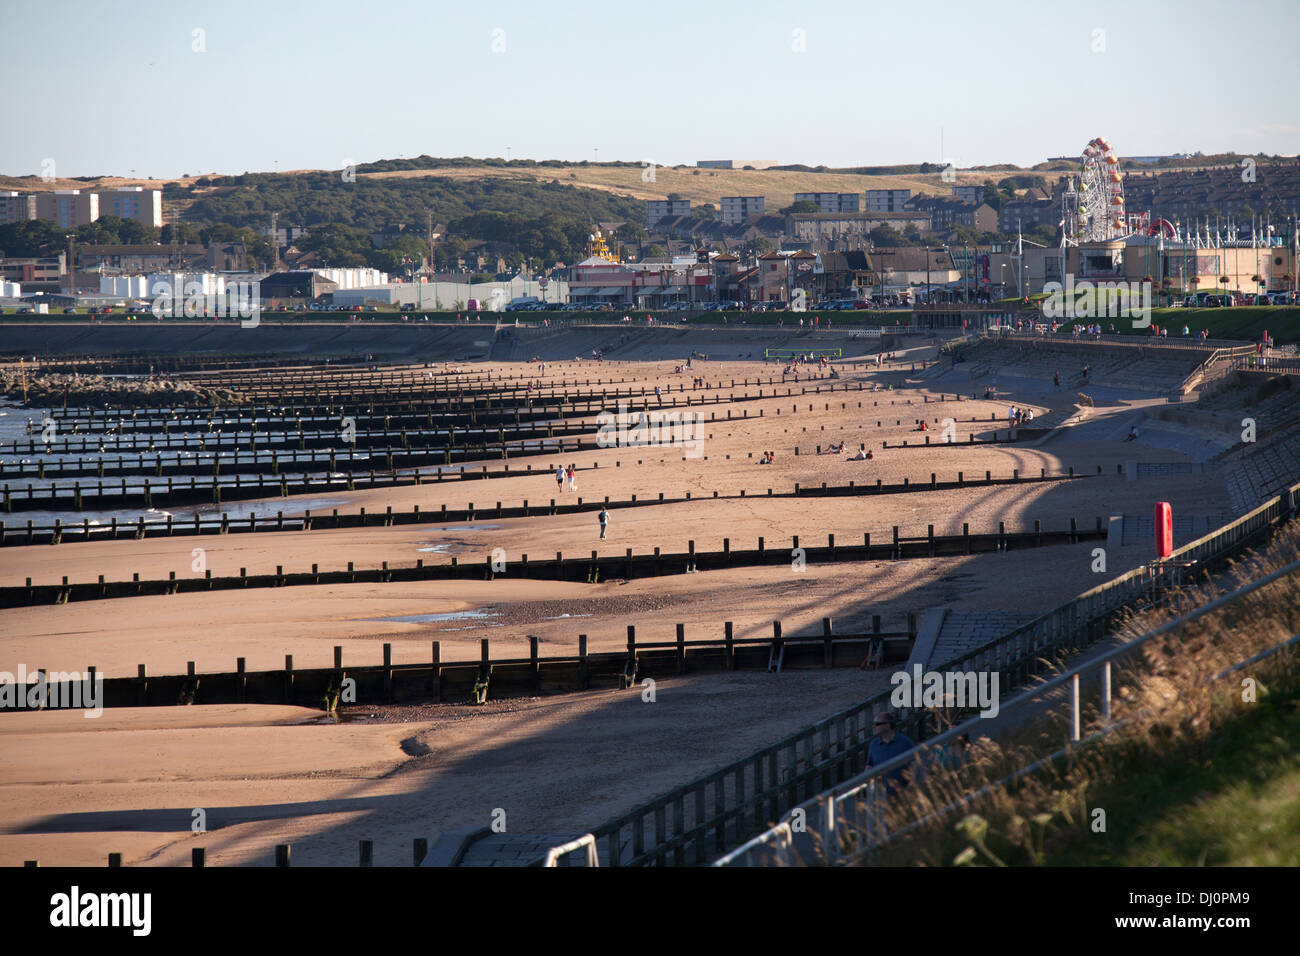 City of Aberdeen, Scotland. Aberdeen esplanade and beach with Codona's Amusement Park in the background. Stock Photo